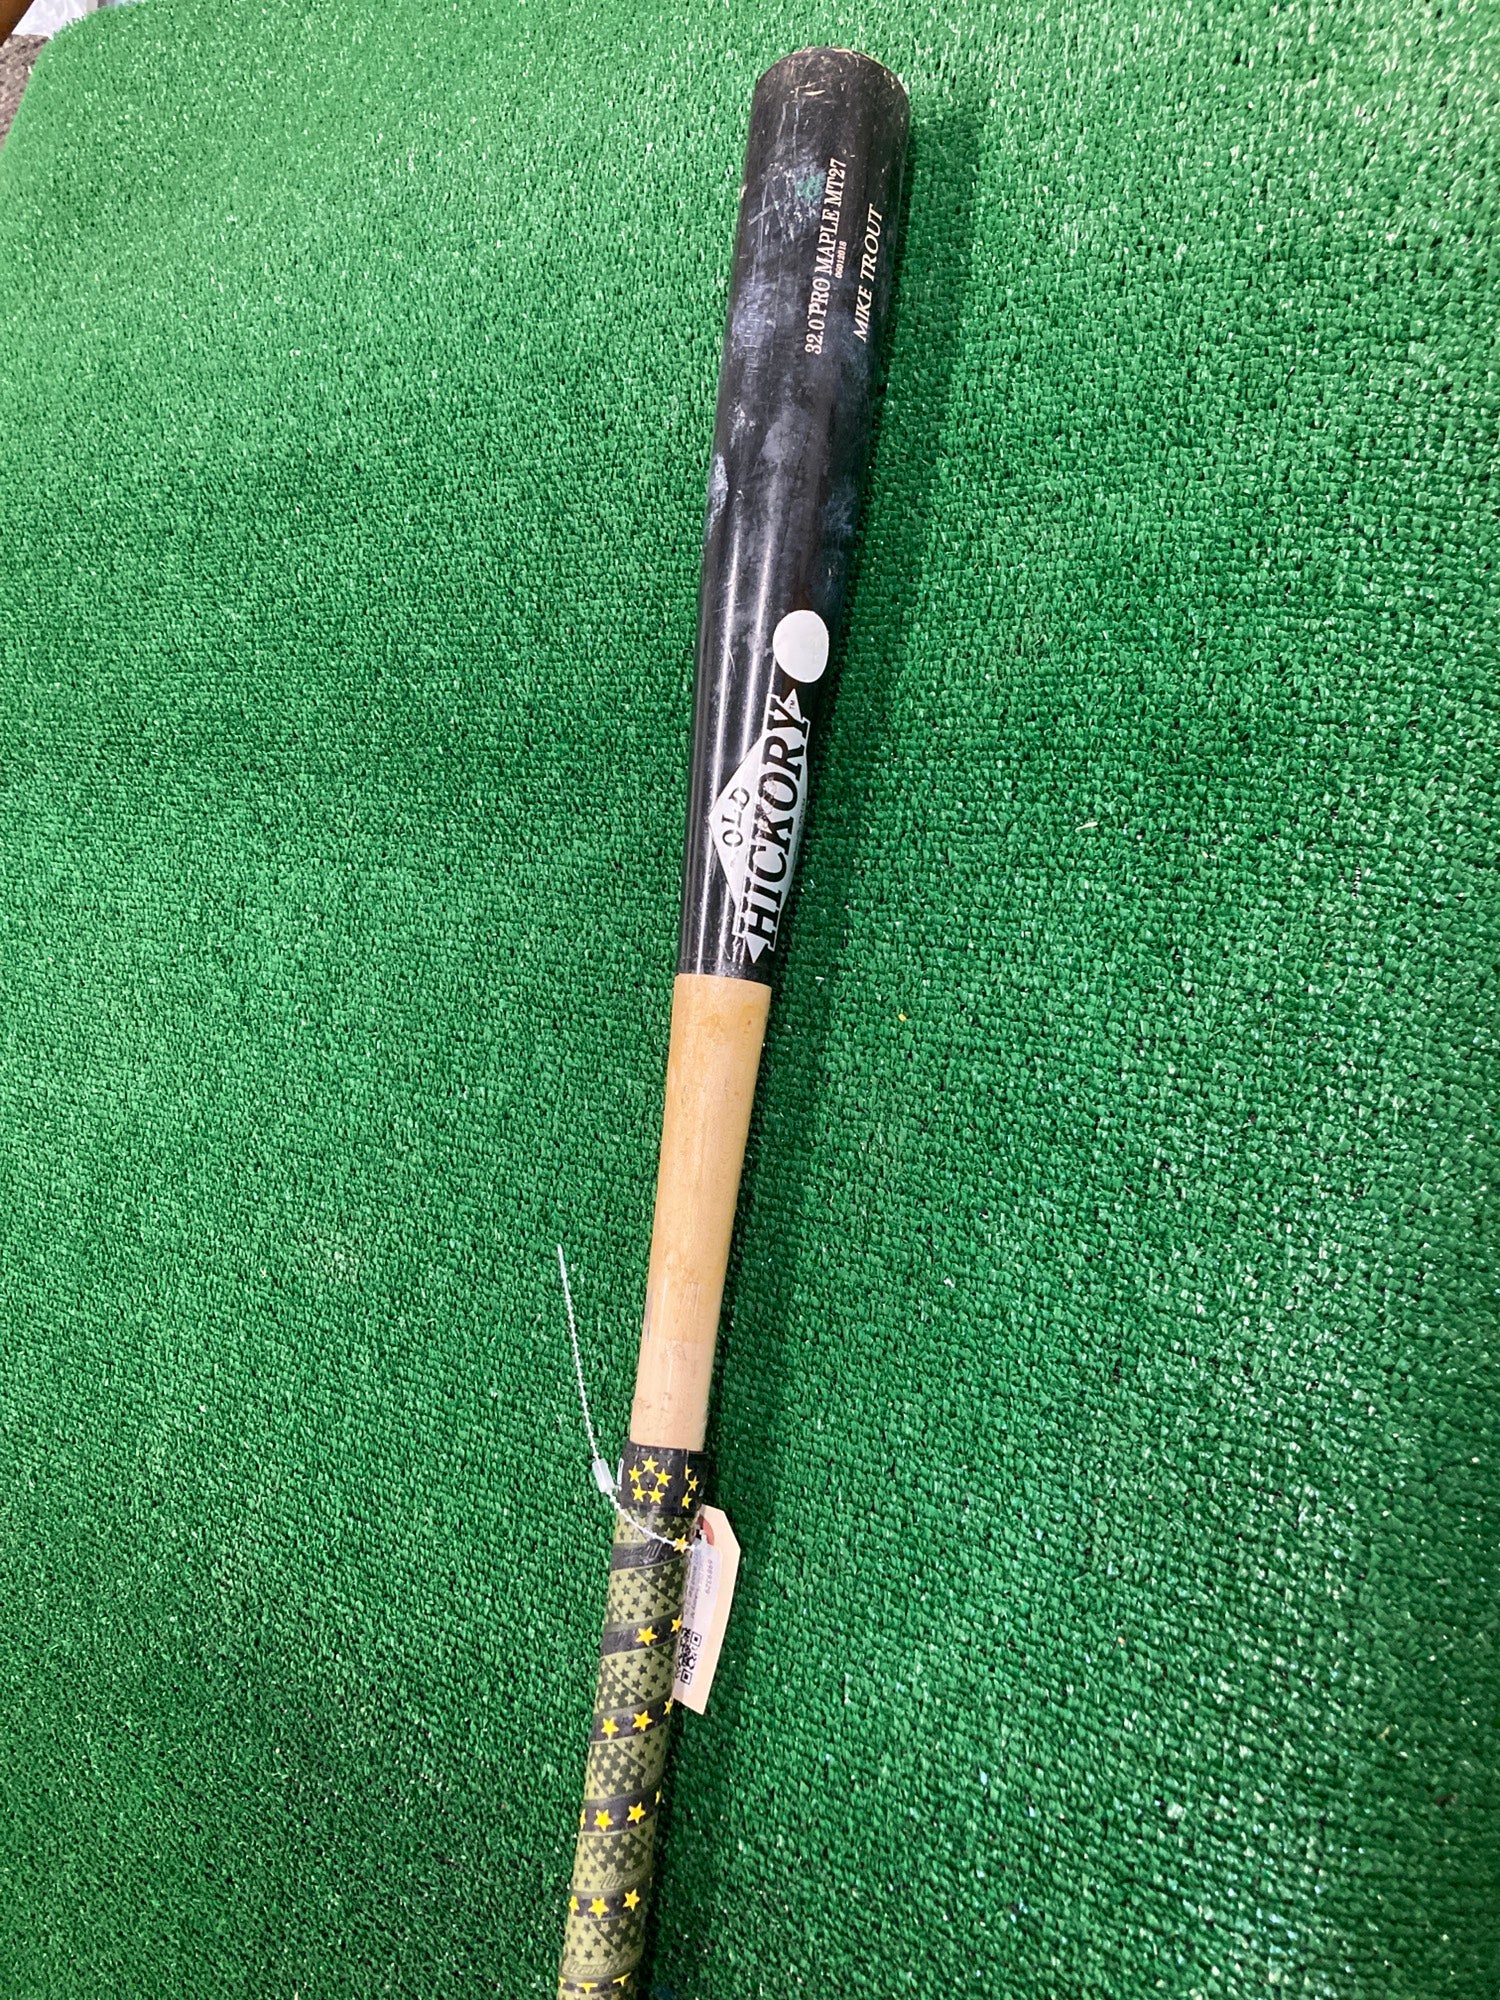 What Pros Wear: Mike Trout's Old Hickory MT27 Bat - What Pros Wear